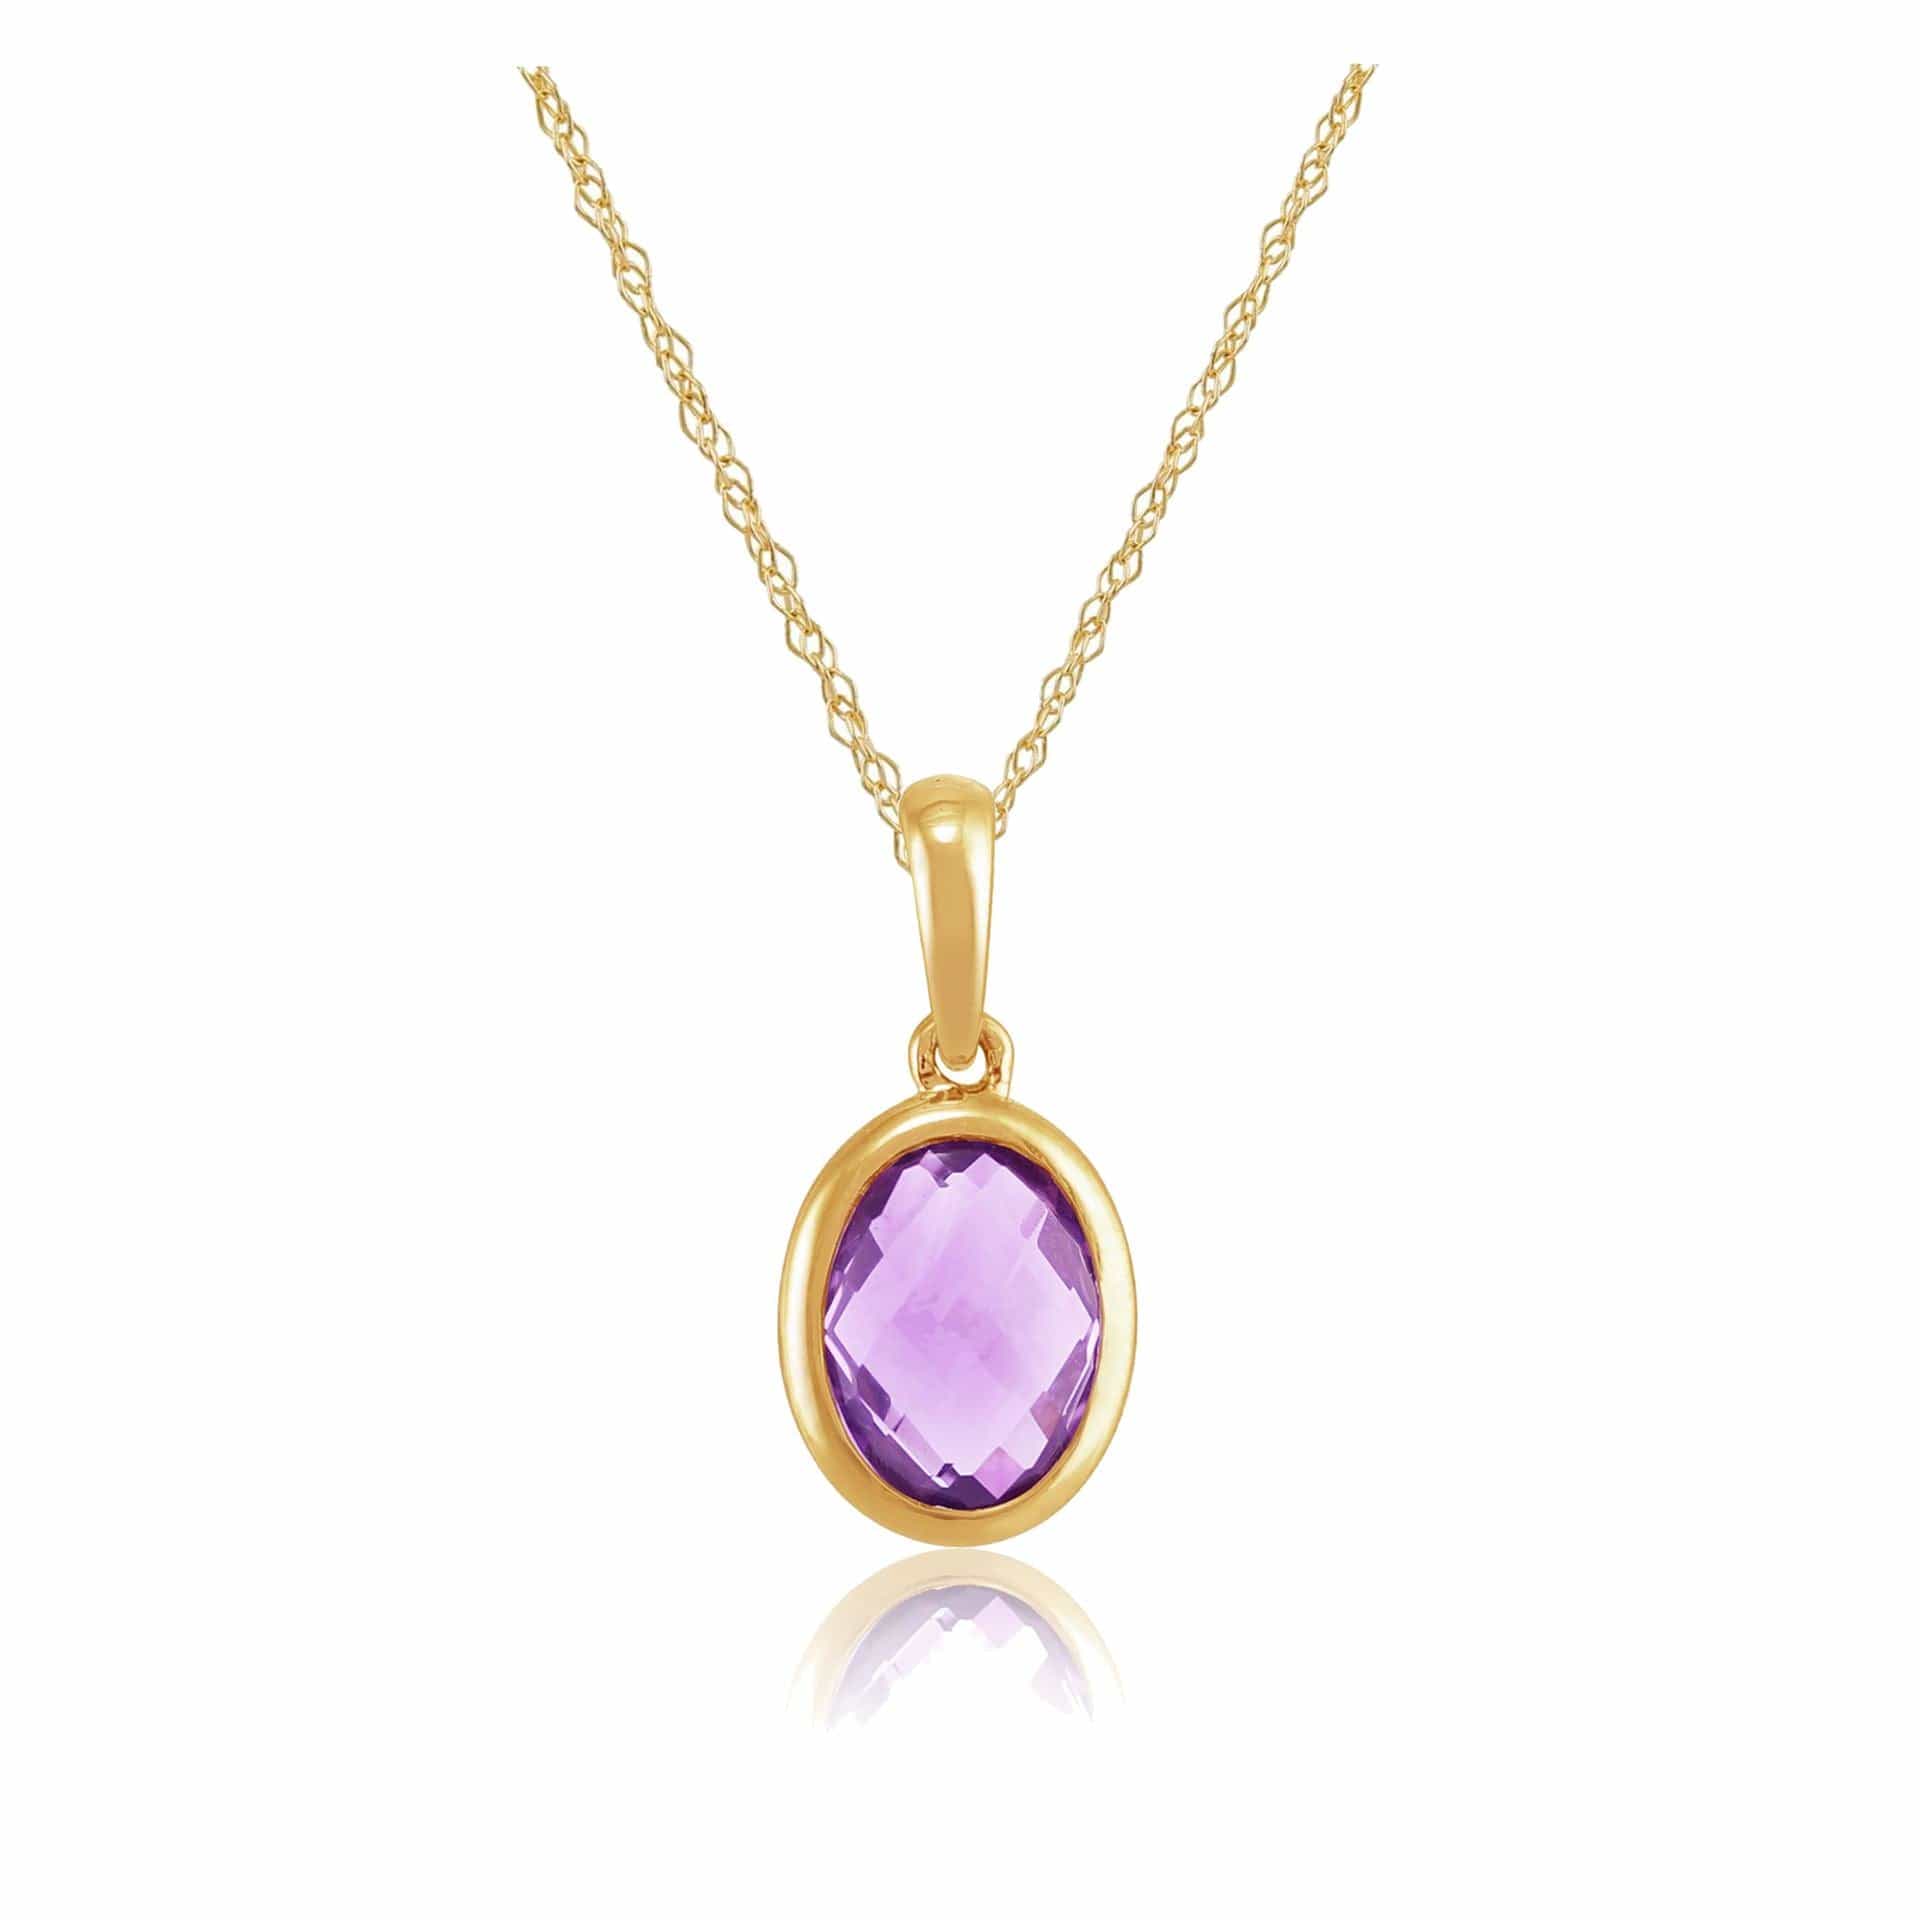 22518 Classic Oval Amethyst Pendant in 9ct Yellow Gold 1